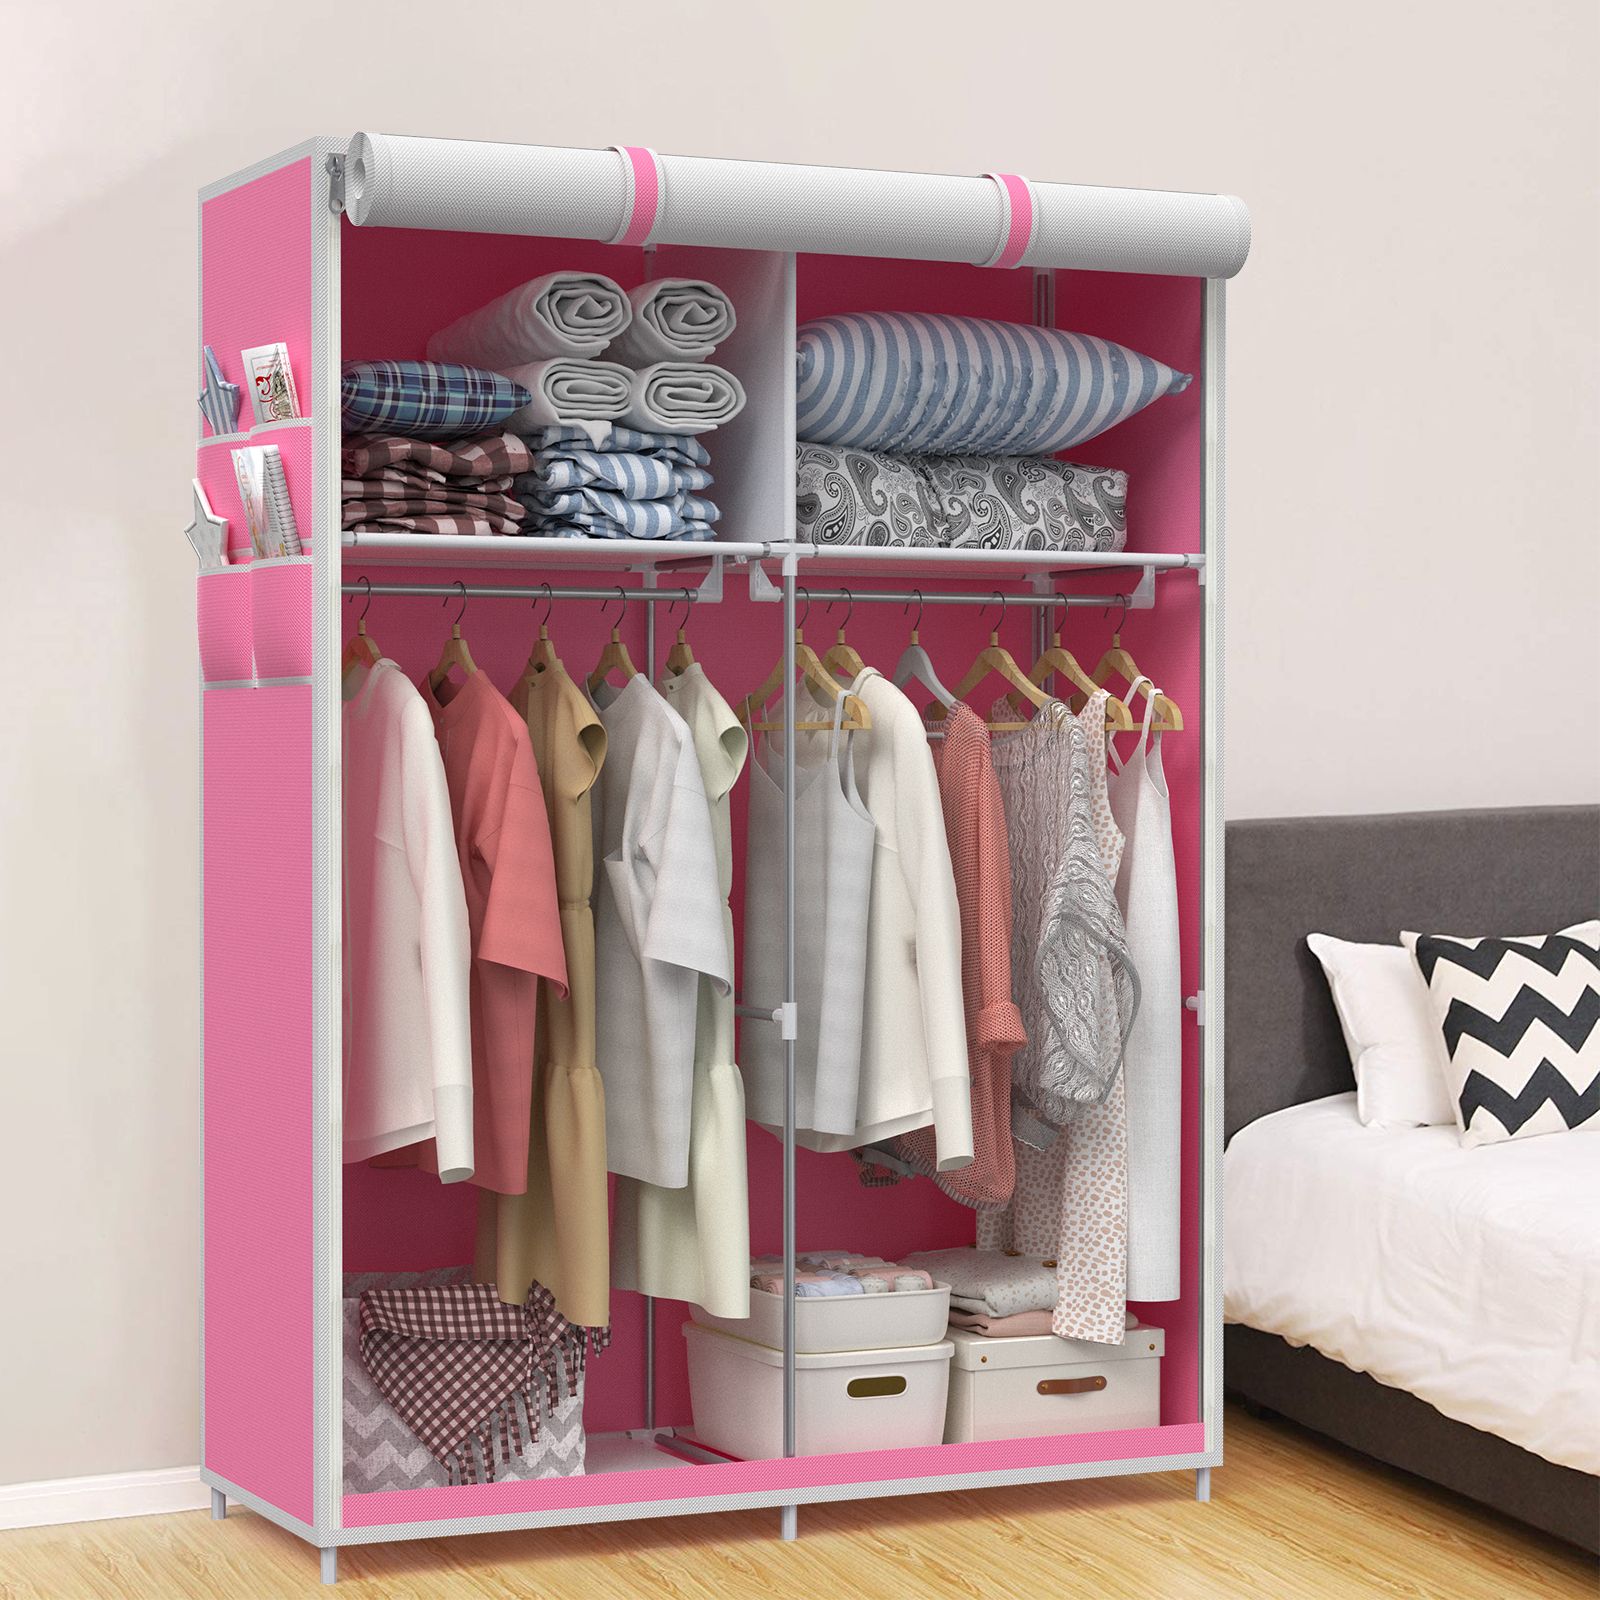 Double Fabric Canvas Wardrobe With Clothes Hanging Rail Storage Shelves  Cupboard | Ebay Pertaining To Double Rail Canvas Wardrobes (View 17 of 20)